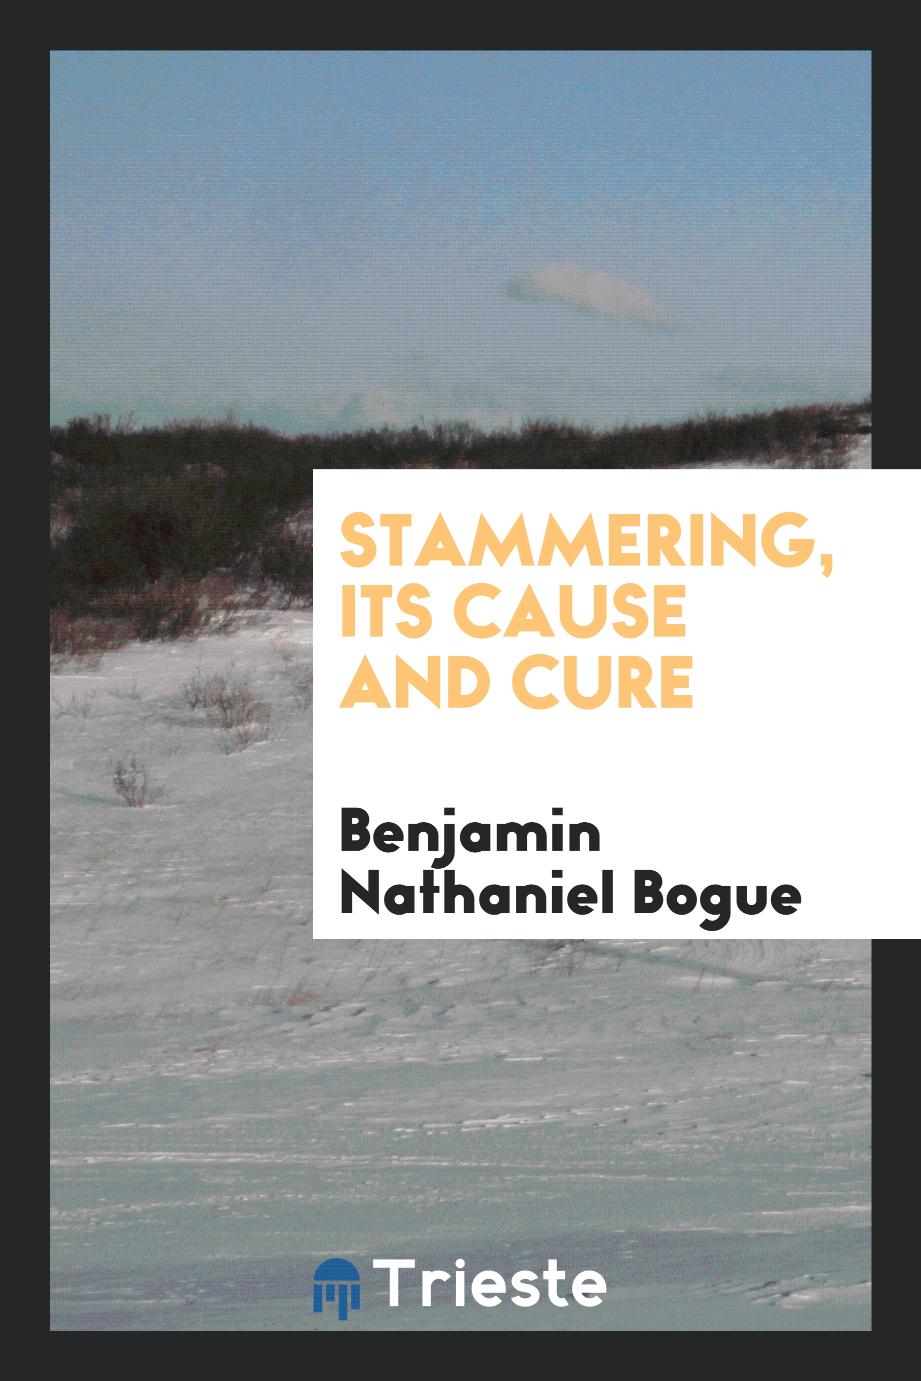 Stammering, its cause and cure